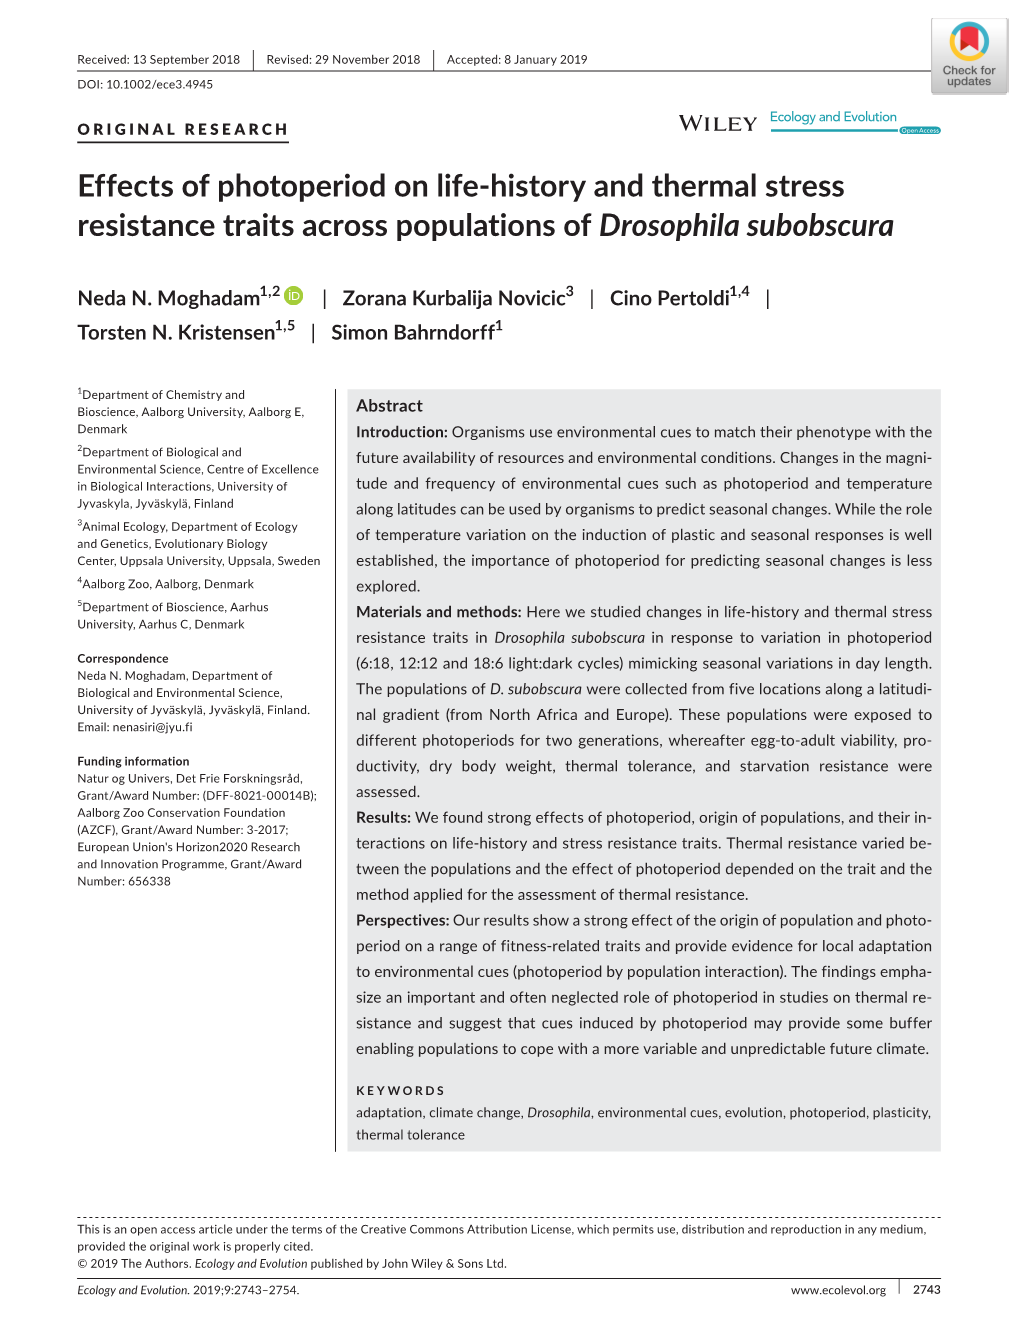 Effects of Photoperiod on Life‐History and Thermal Stress Resistance Traits Across Populations of Drosophila Subobscura